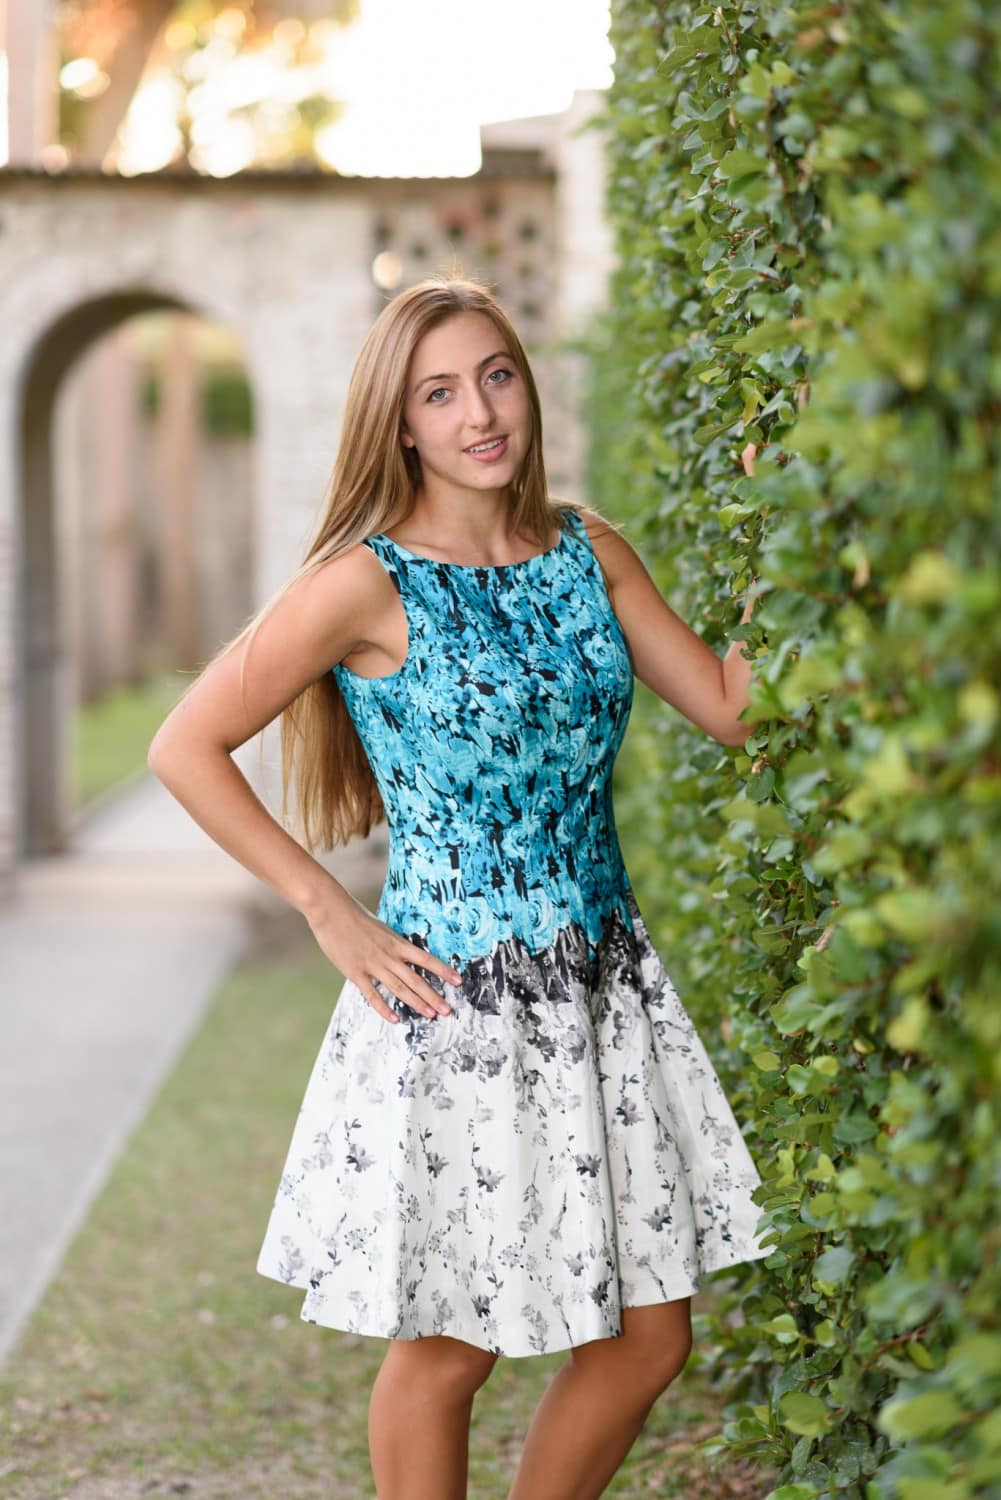 Posing by the ivy covered wall - Atalaya Castle